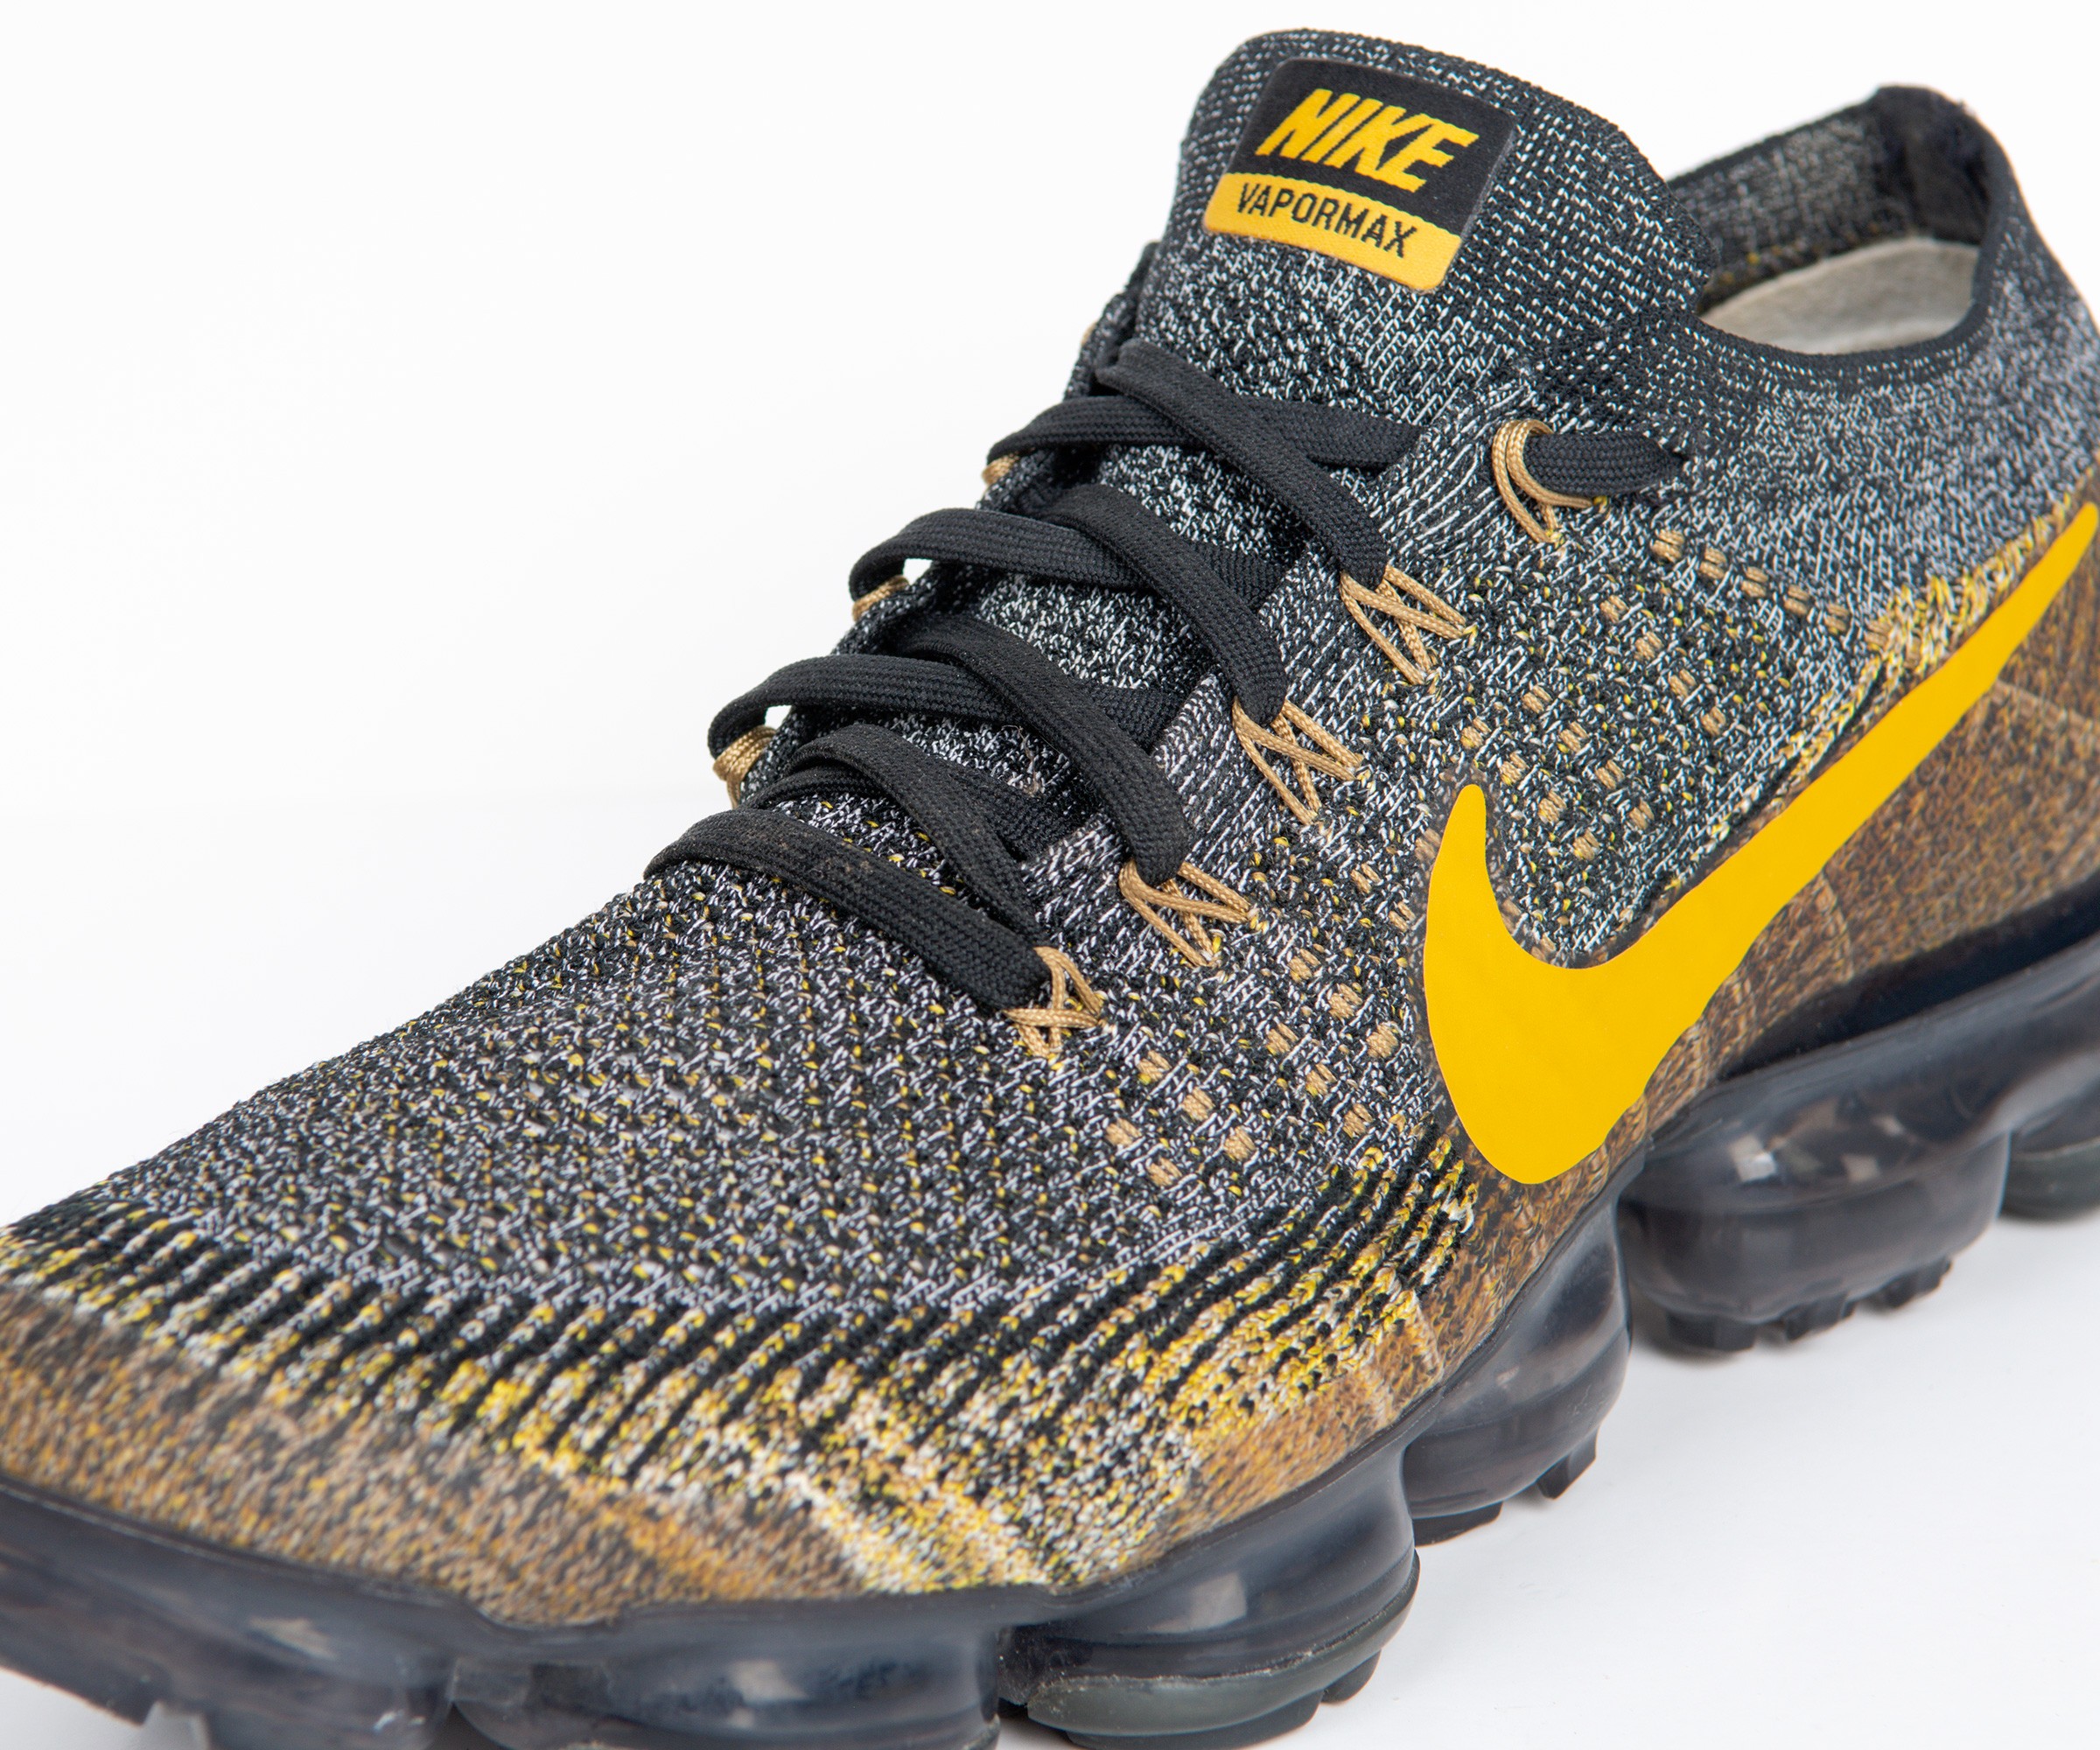 RE-POCKETS NIKE TRAINERS 'Flyknit 3' Black Mineral Gold